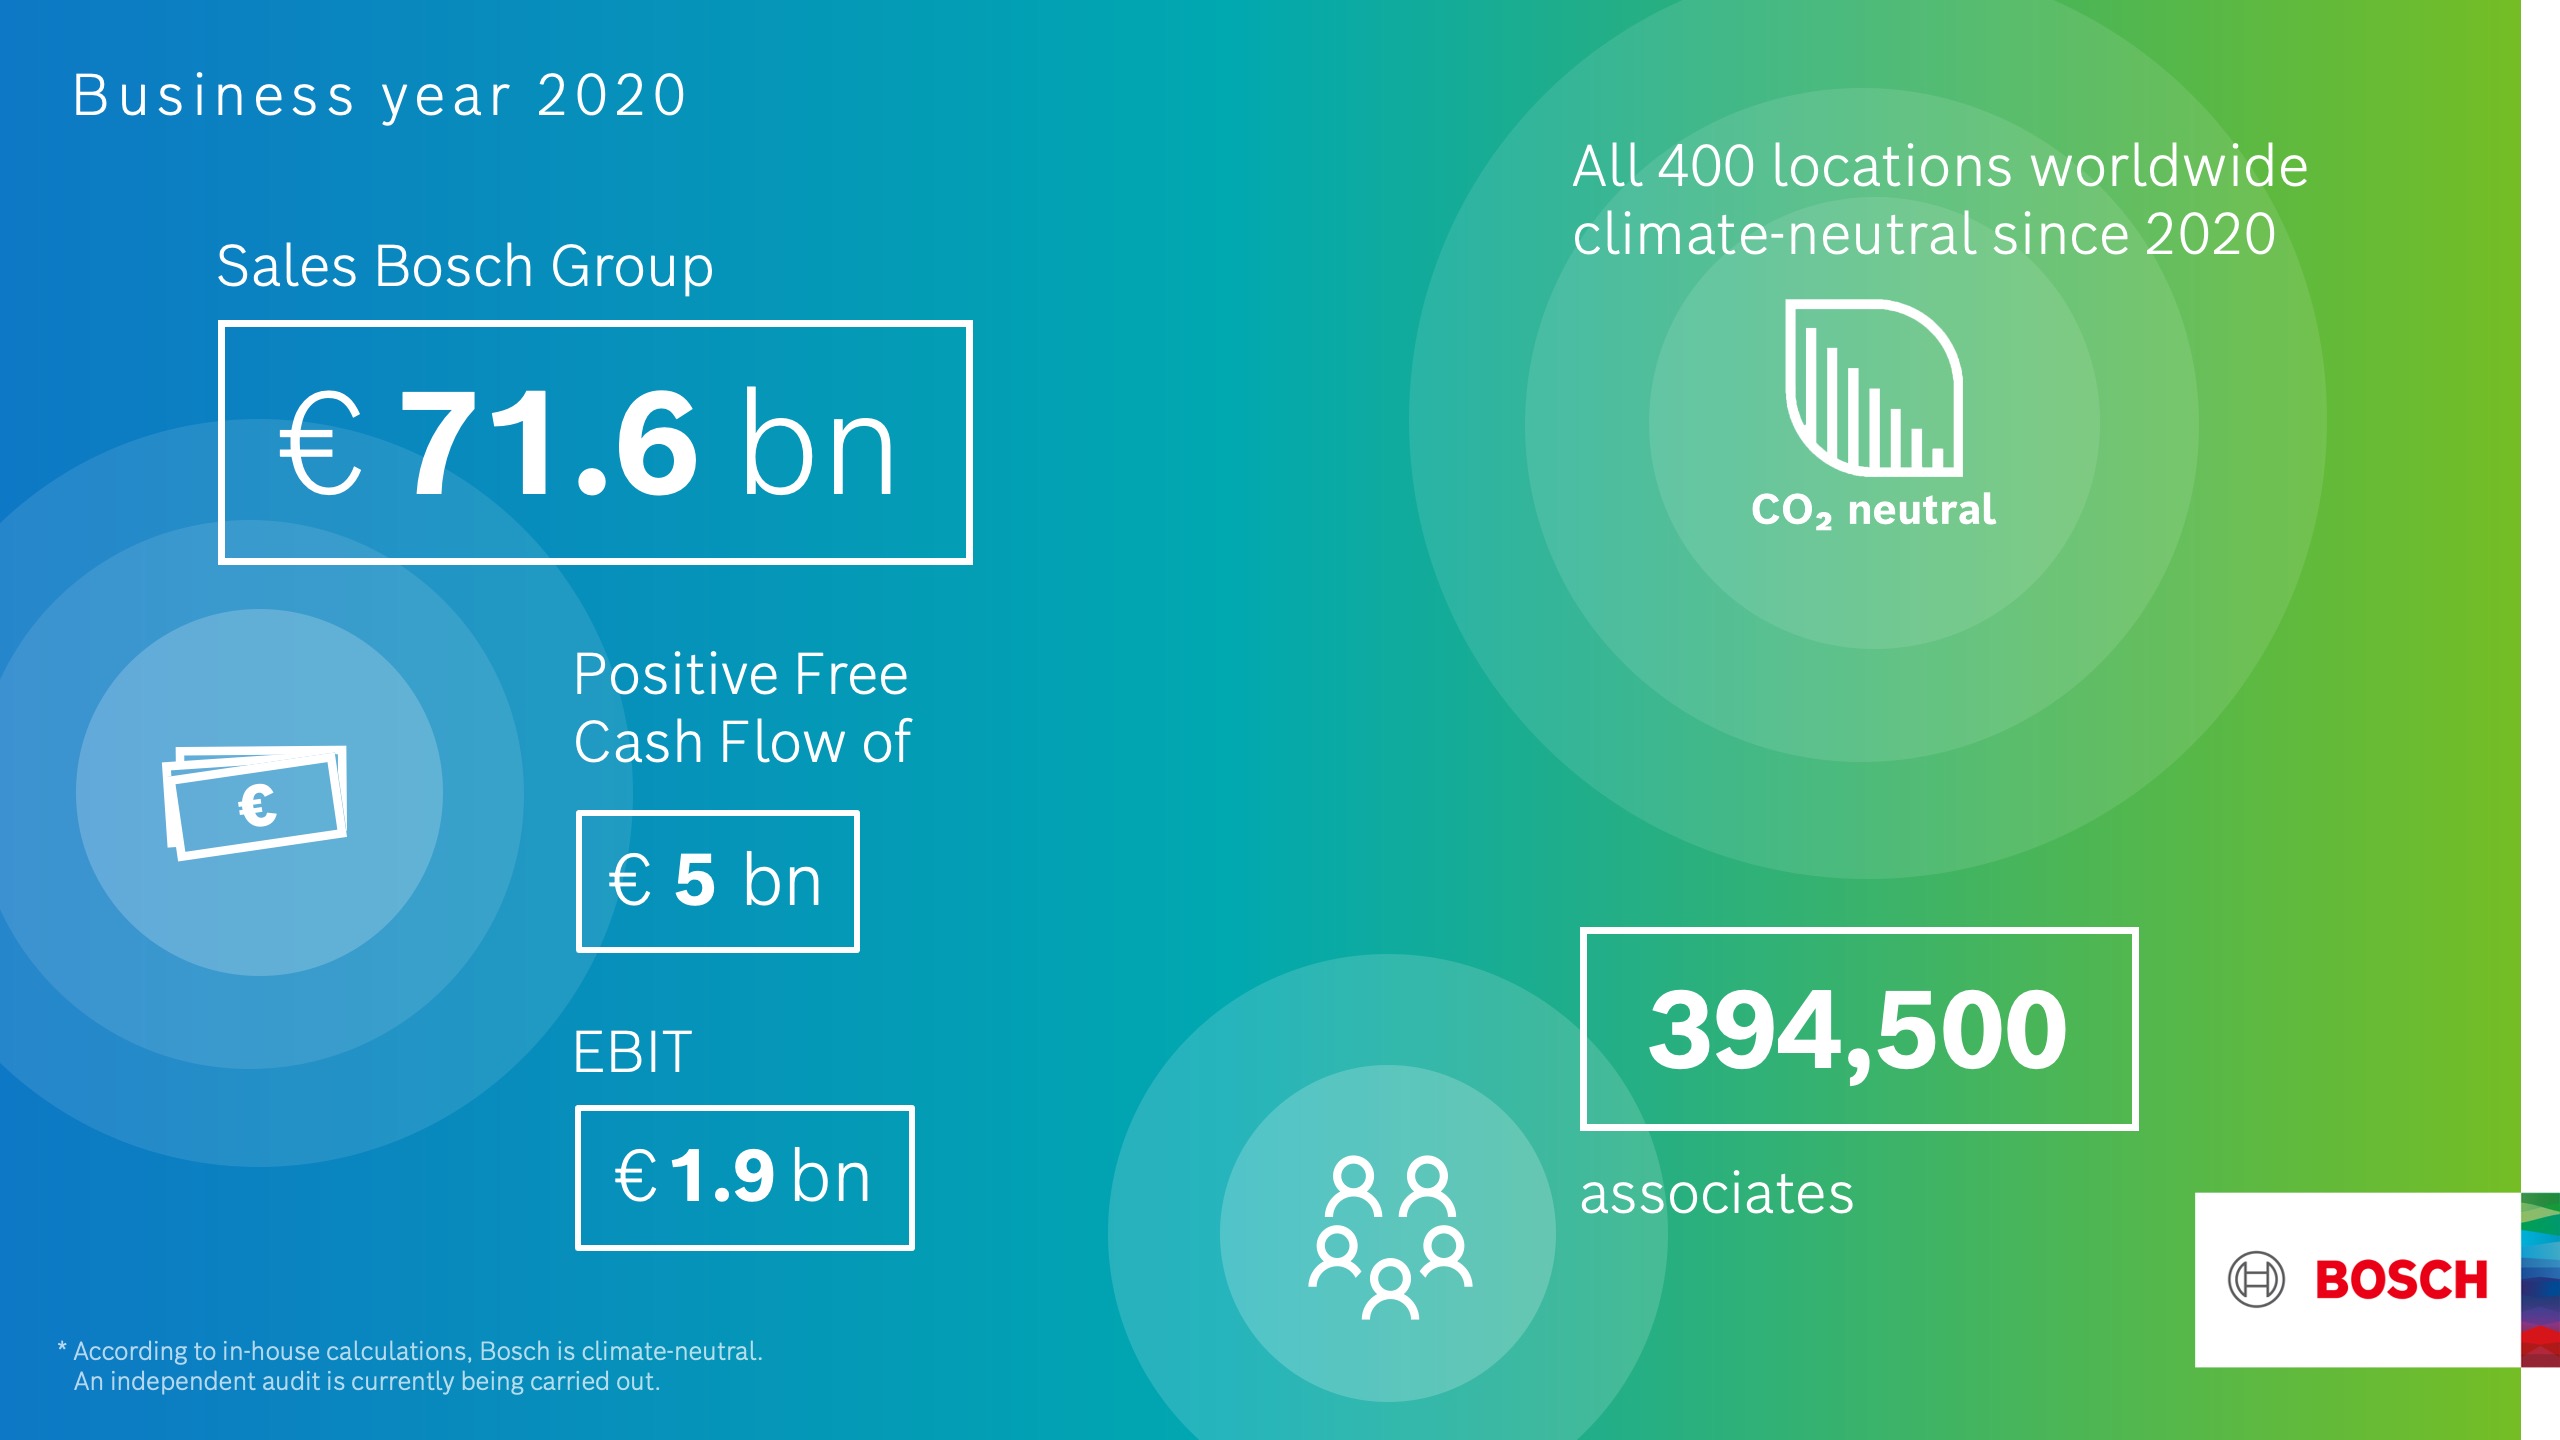 Bosch: preliminary business figures for 2020